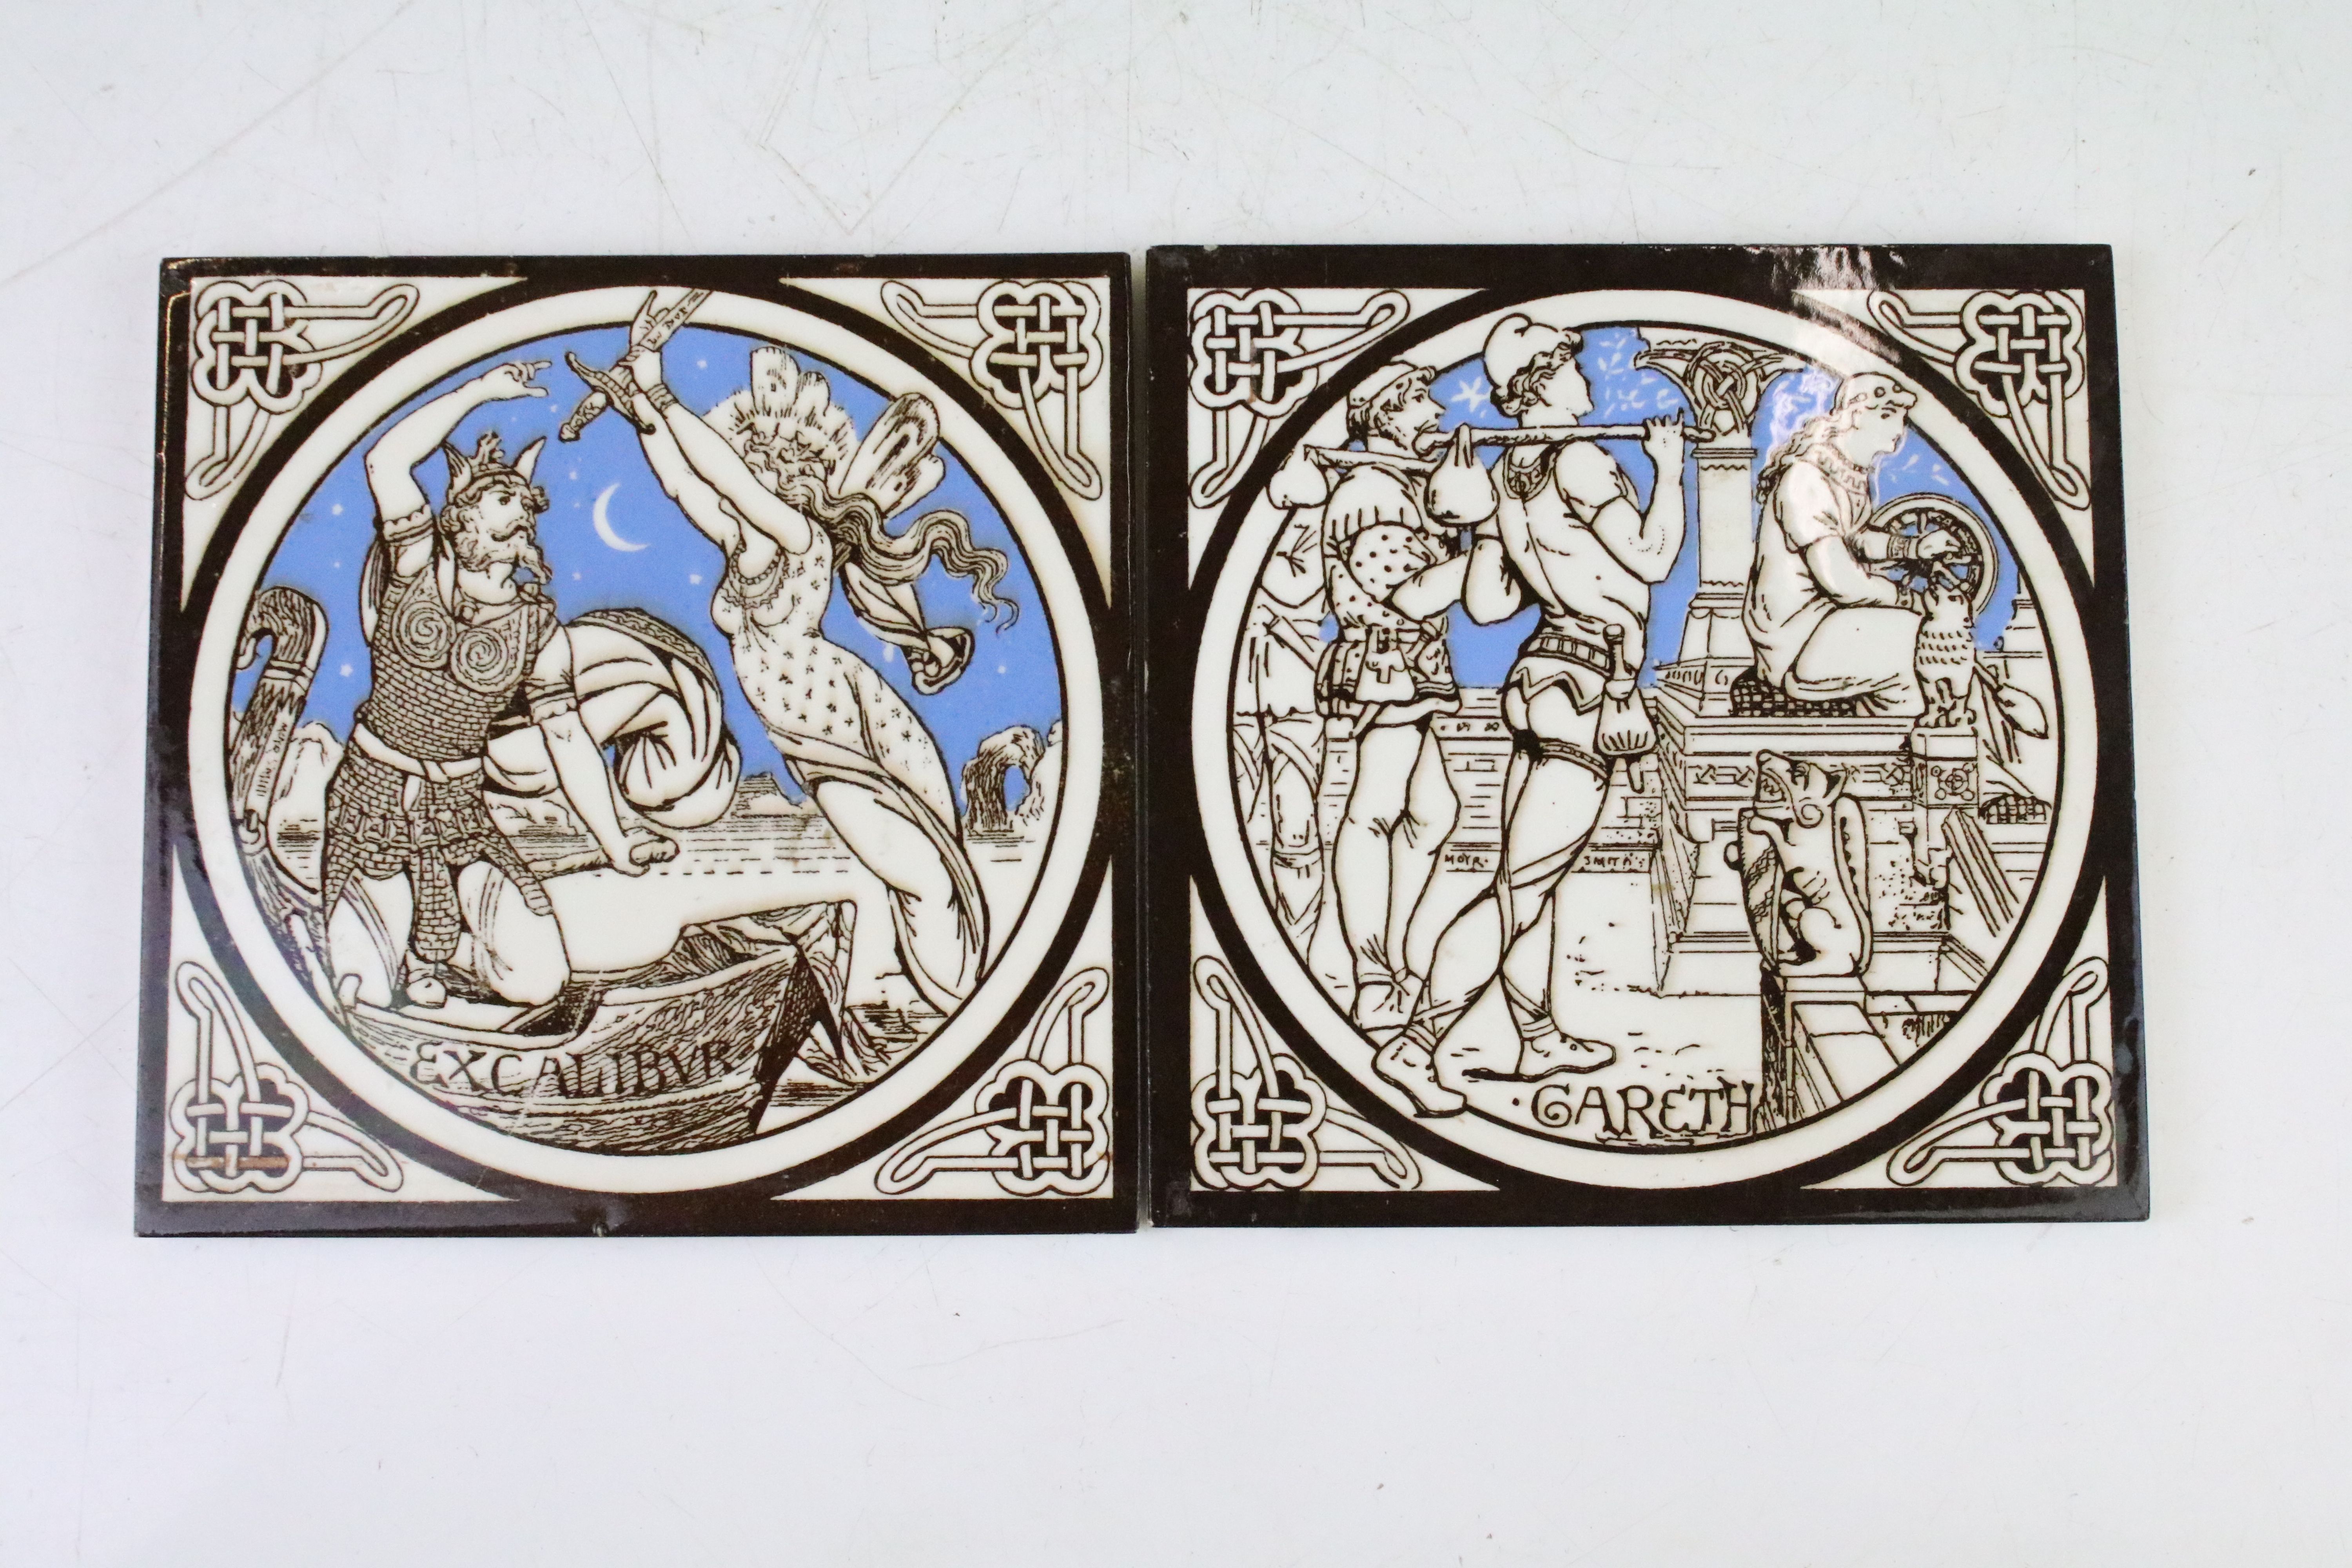 Five Minton China Works Tiles from the Idylls of the King Series designed by J Moyr Smith - Image 2 of 8